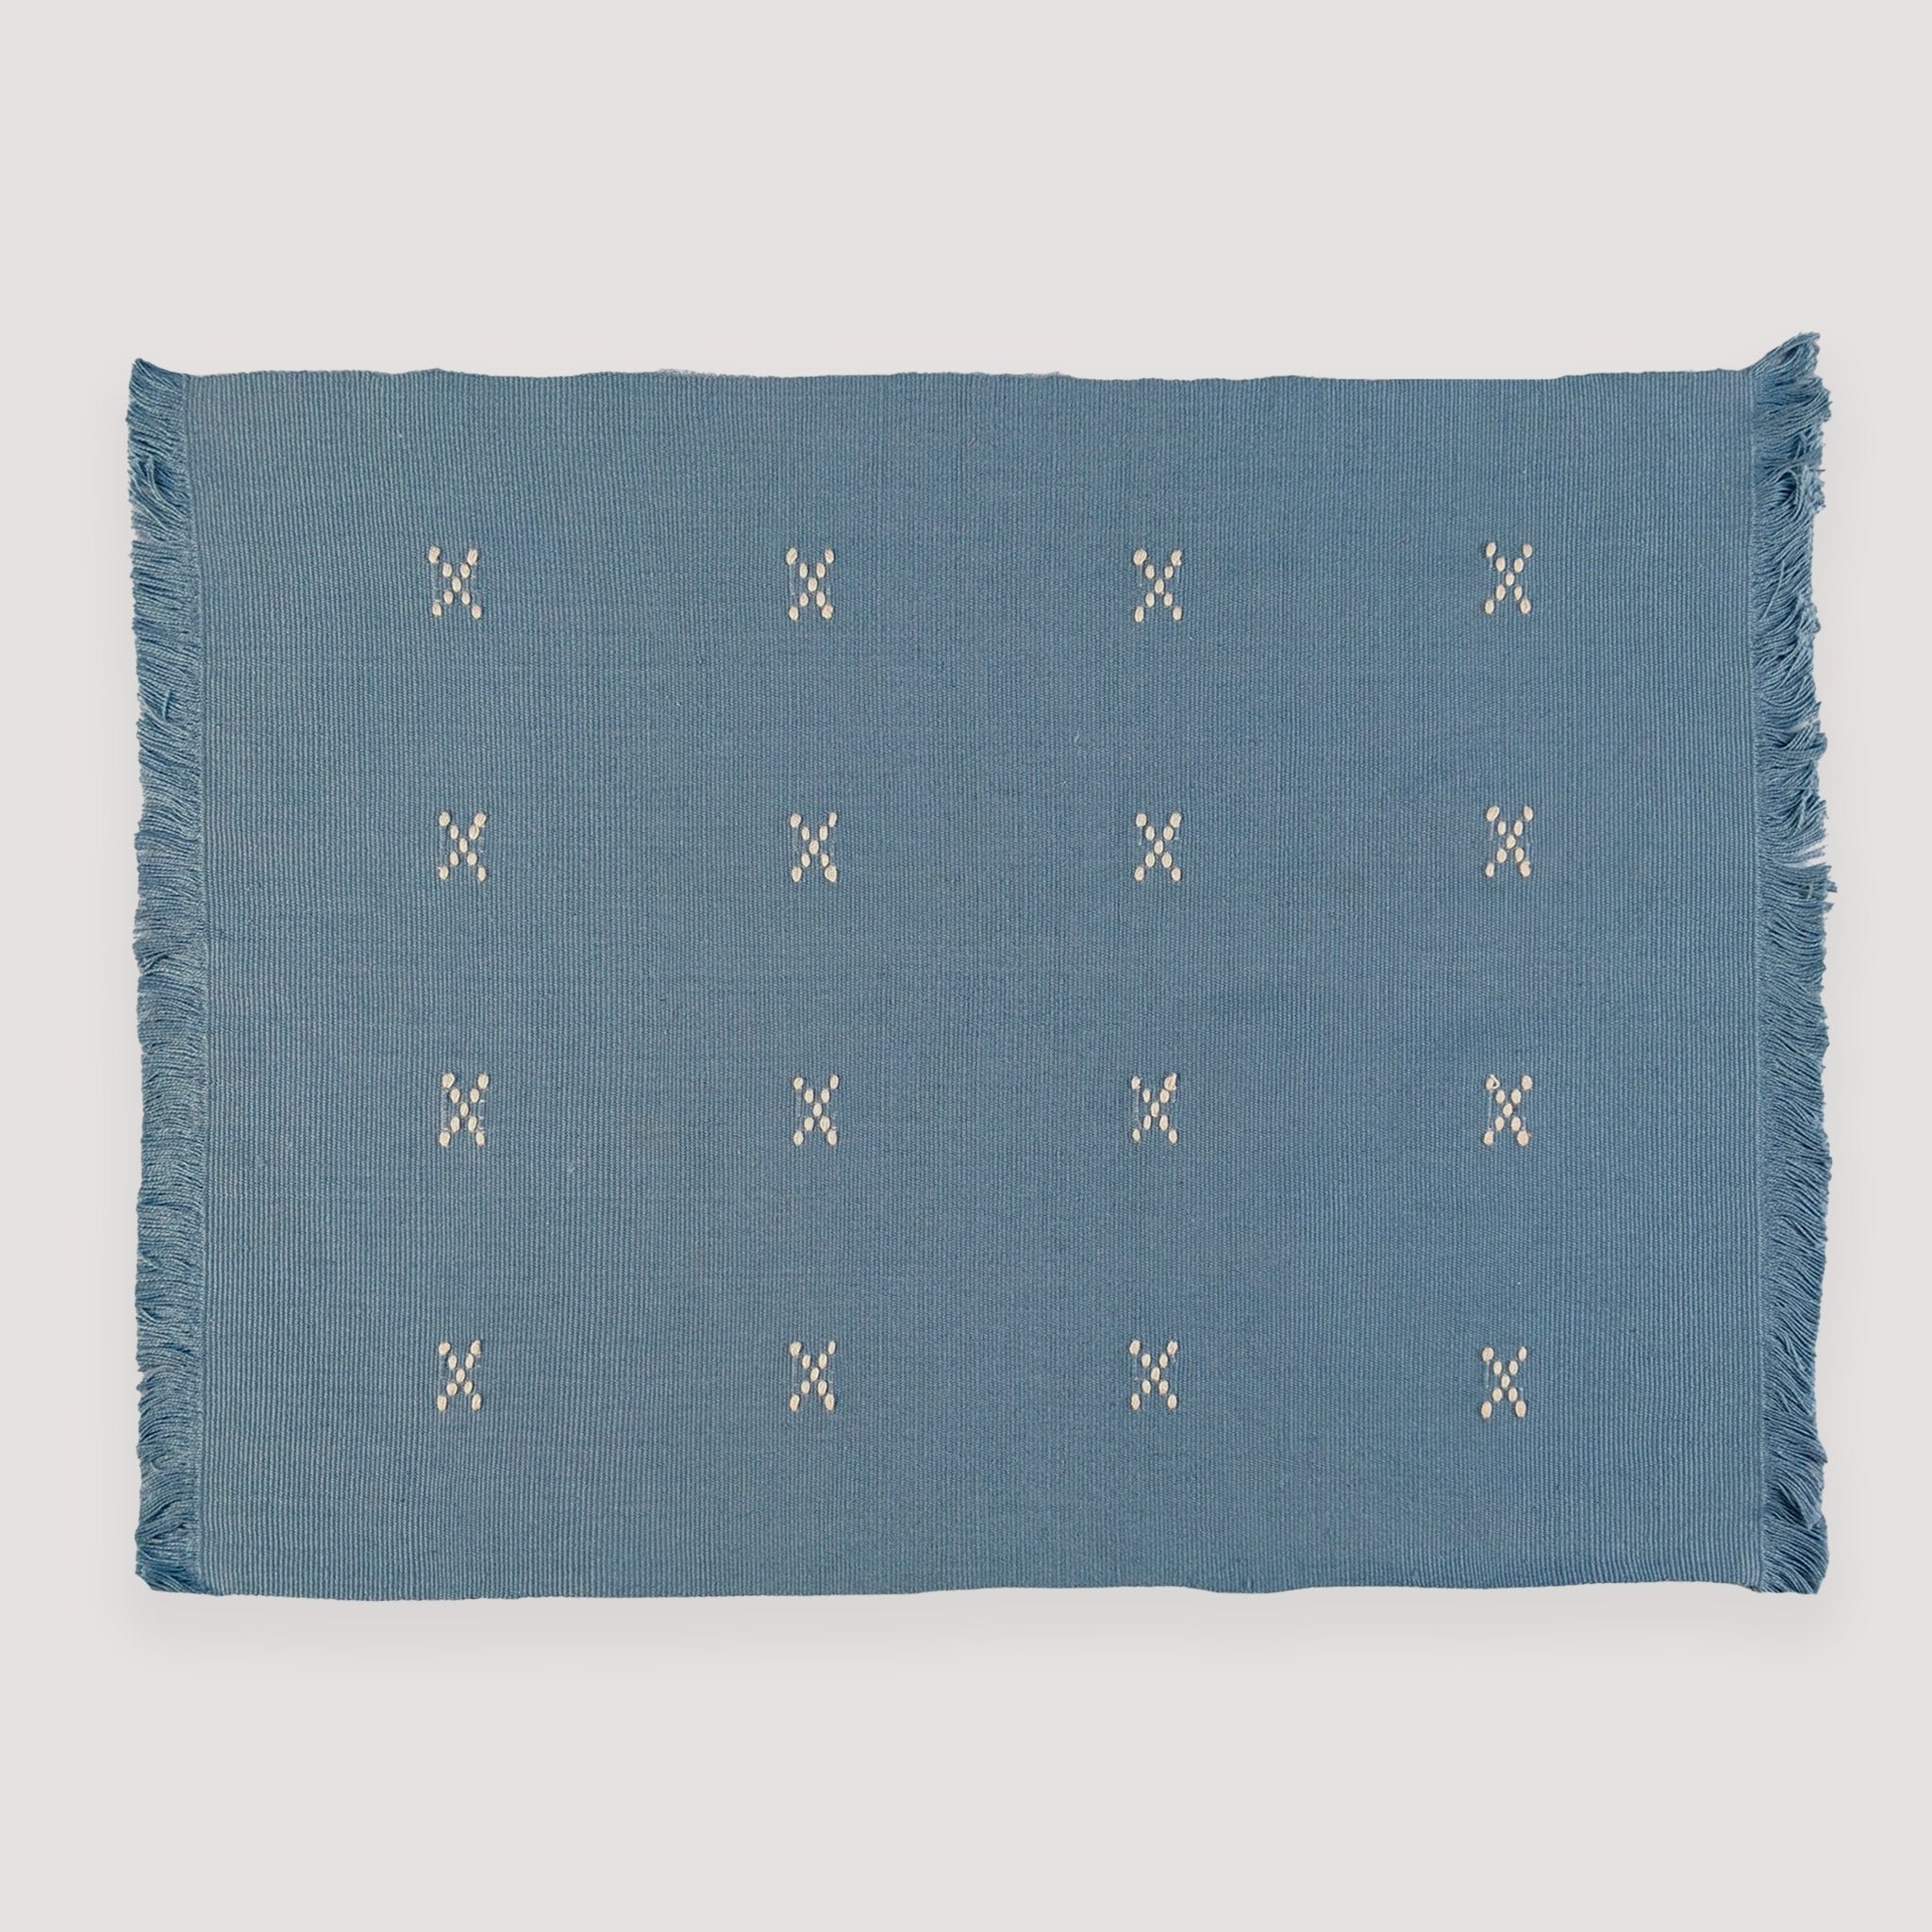 Mexa Slate Blue // Set of 4 Cotton Placemats - MDRNX